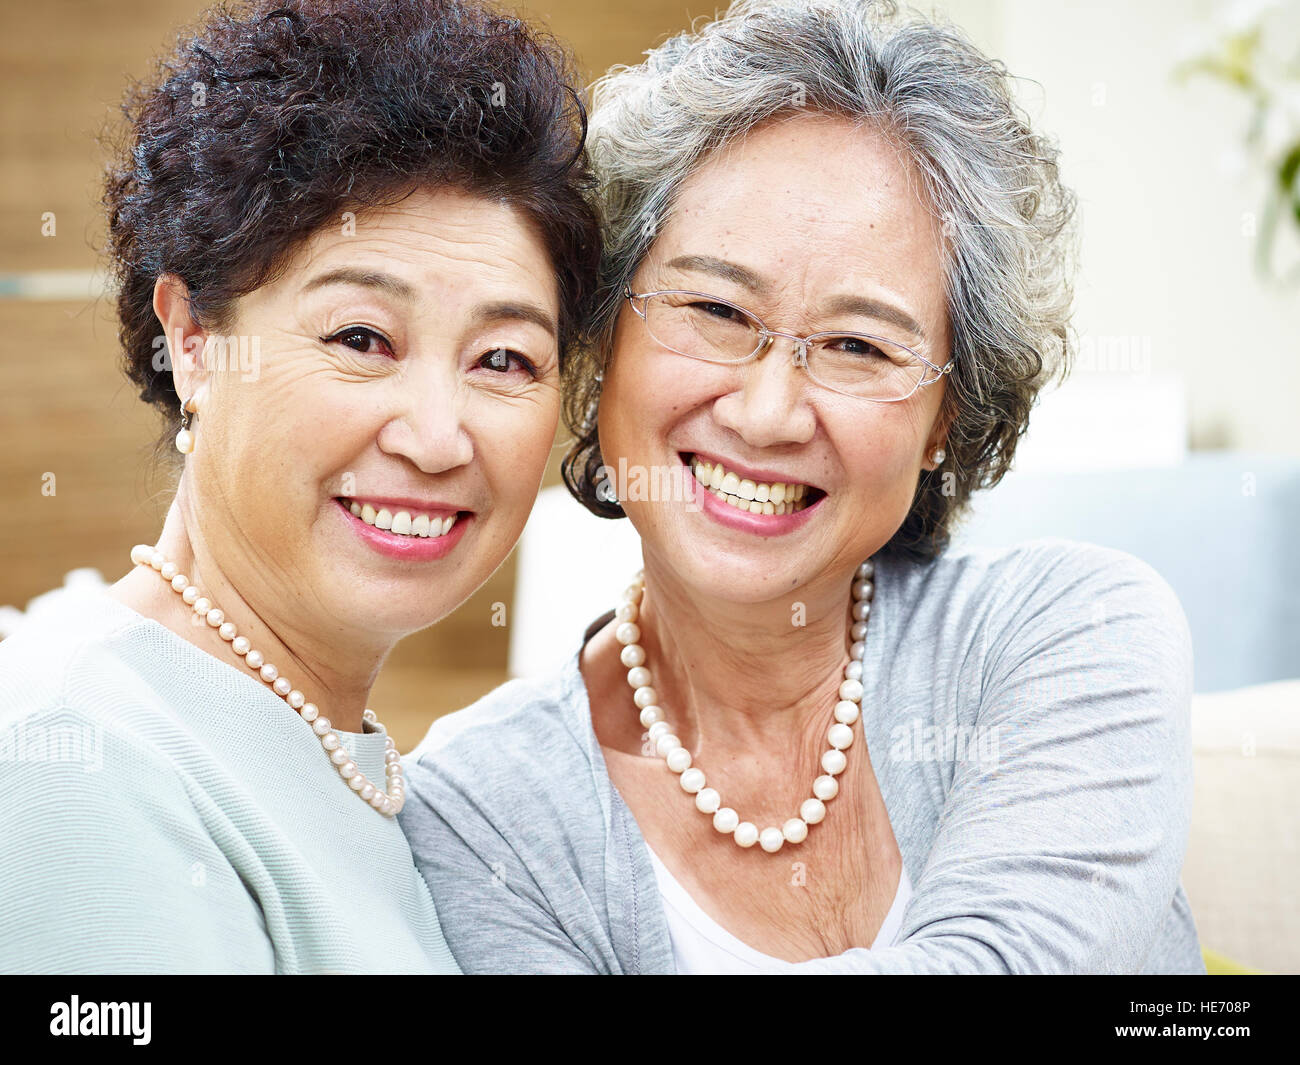 close-up portrait of a happy senior asian couple looking at camera smiling. Stock Photo